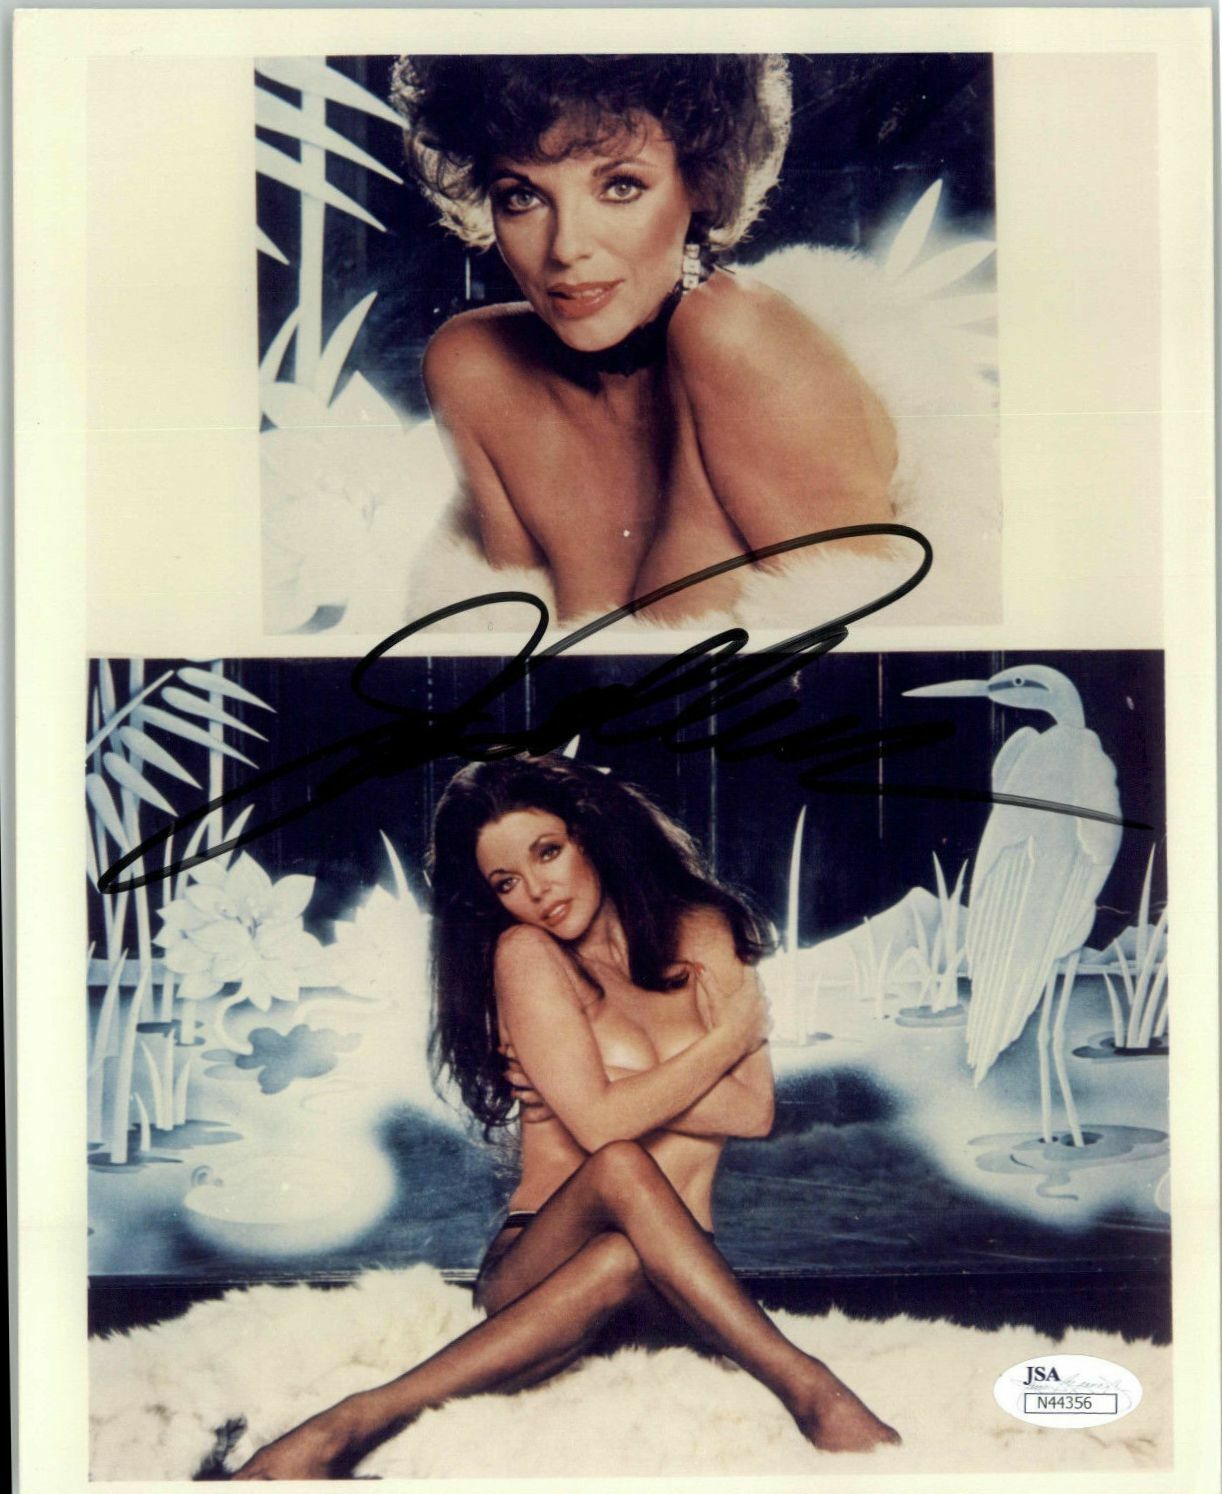 JOAN COLLINS SIGNED AUTOGRAPHED 8X10 HOT Photo Poster painting AUTHENTICATED JSA #44356